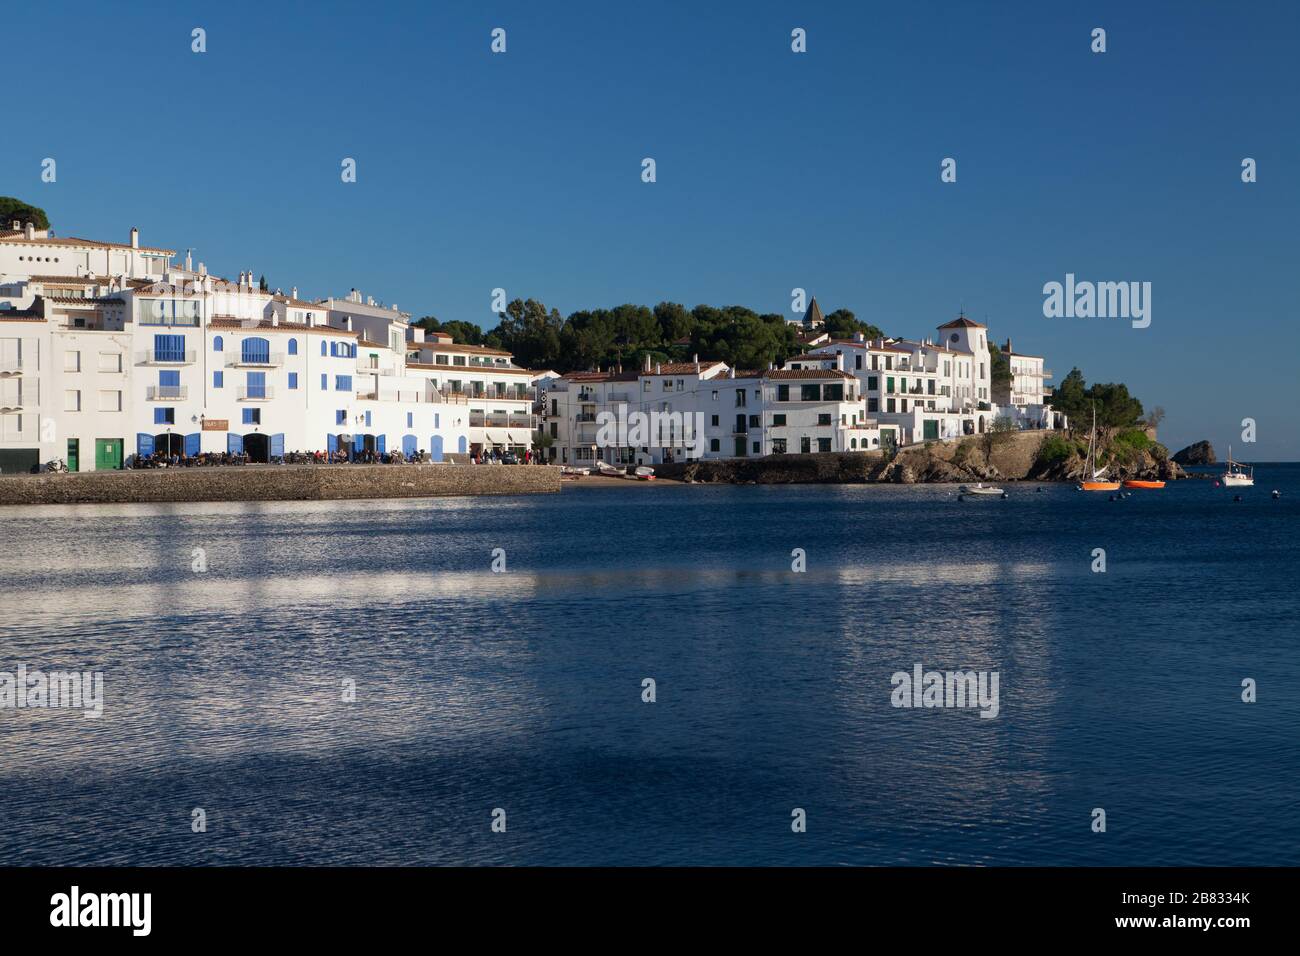 A panoramic view of the village of Cadaques in Costa Brava, Girona, Spain. Stock Photo